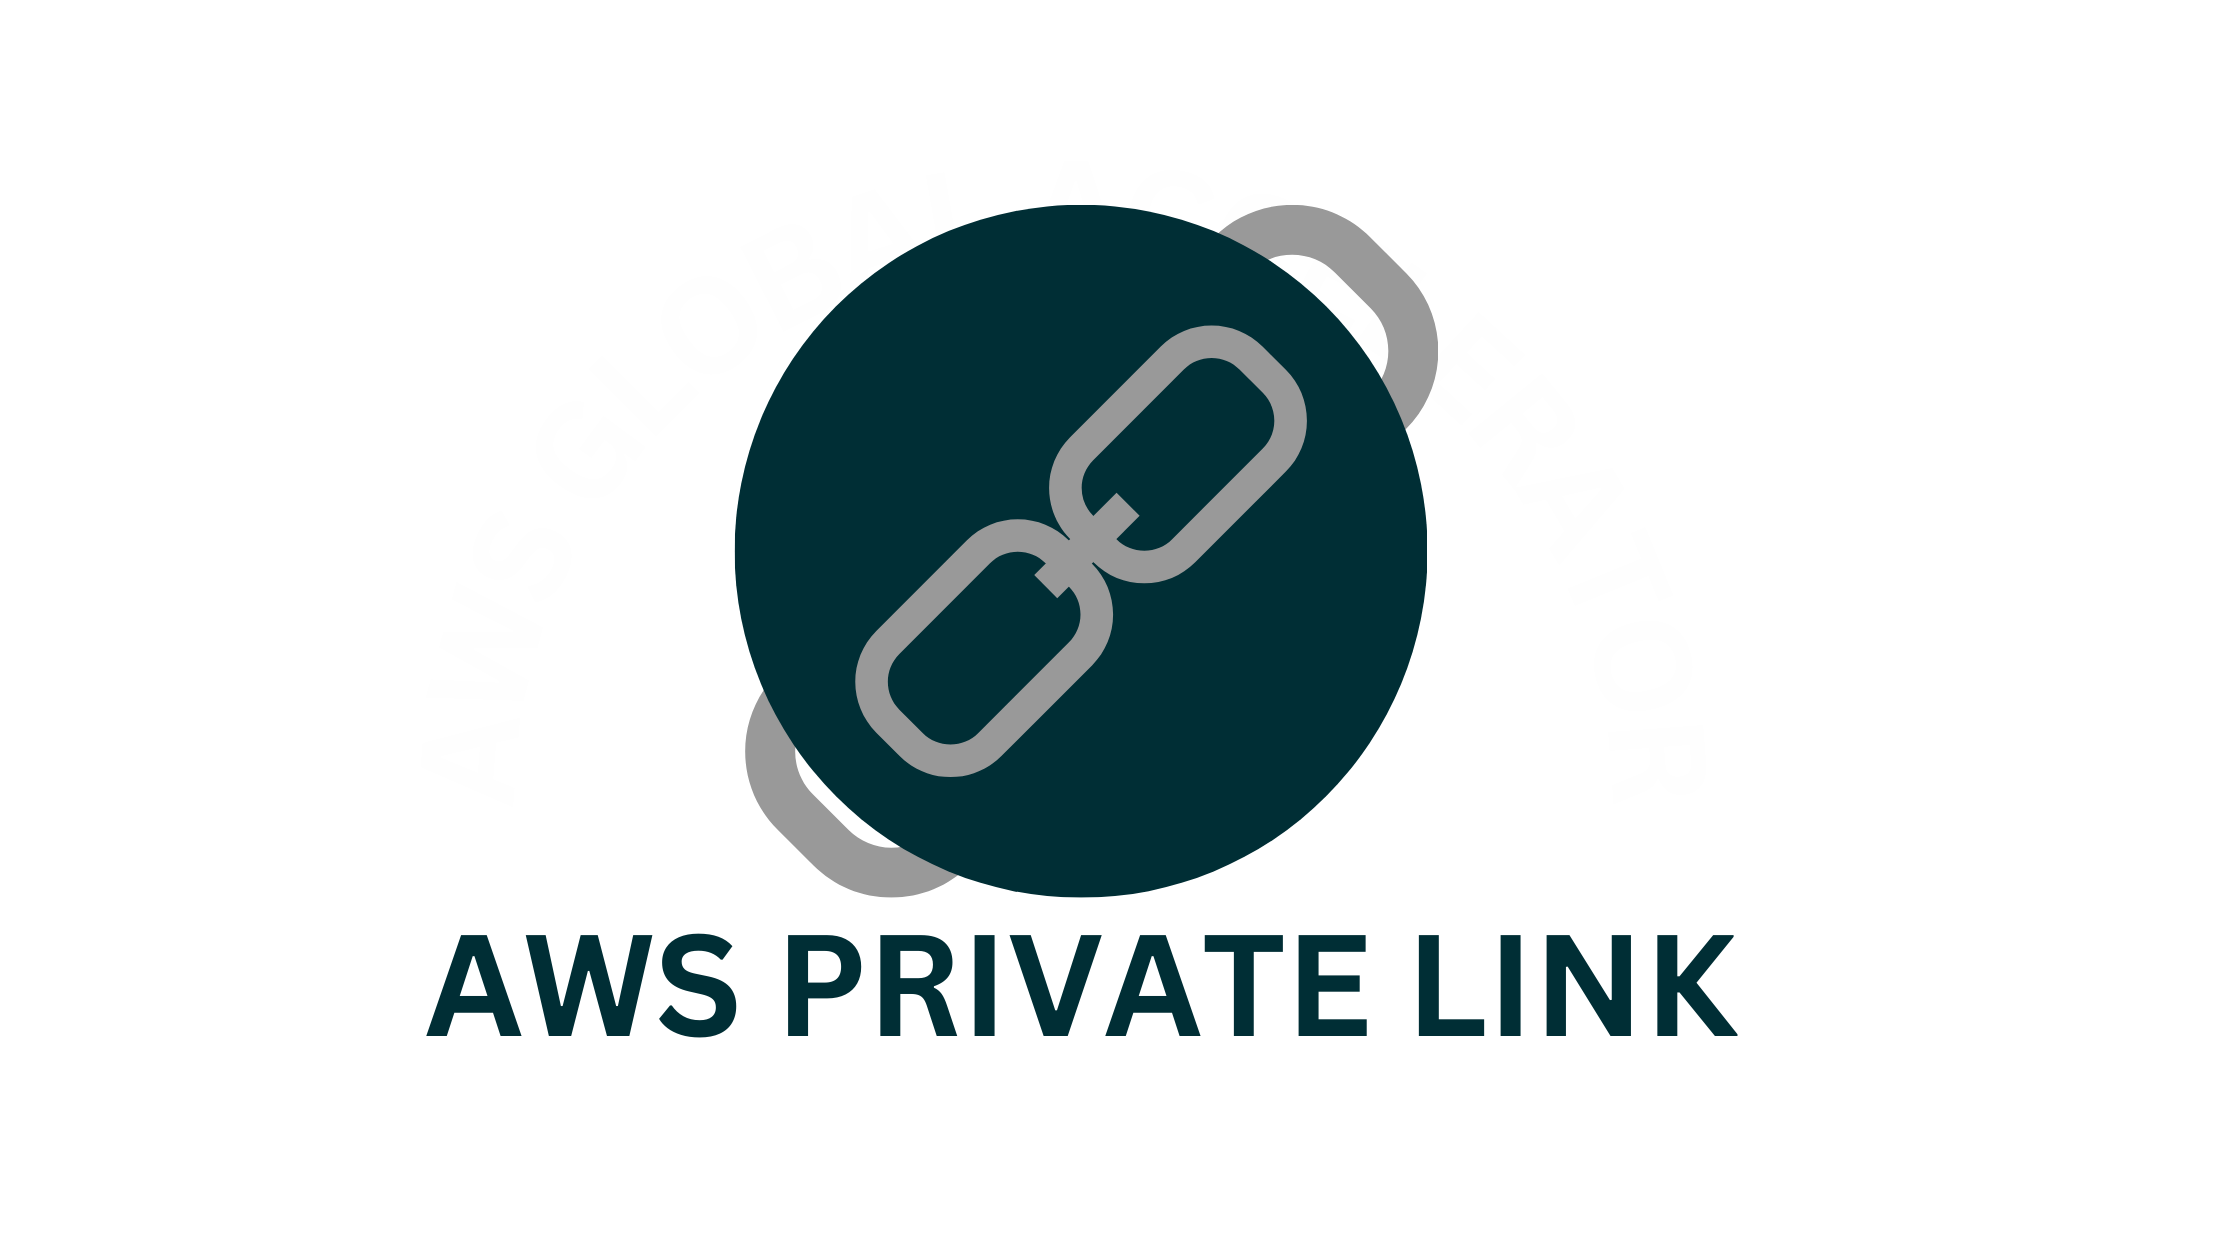 Implementing AWS PrivateLink for Secure Access